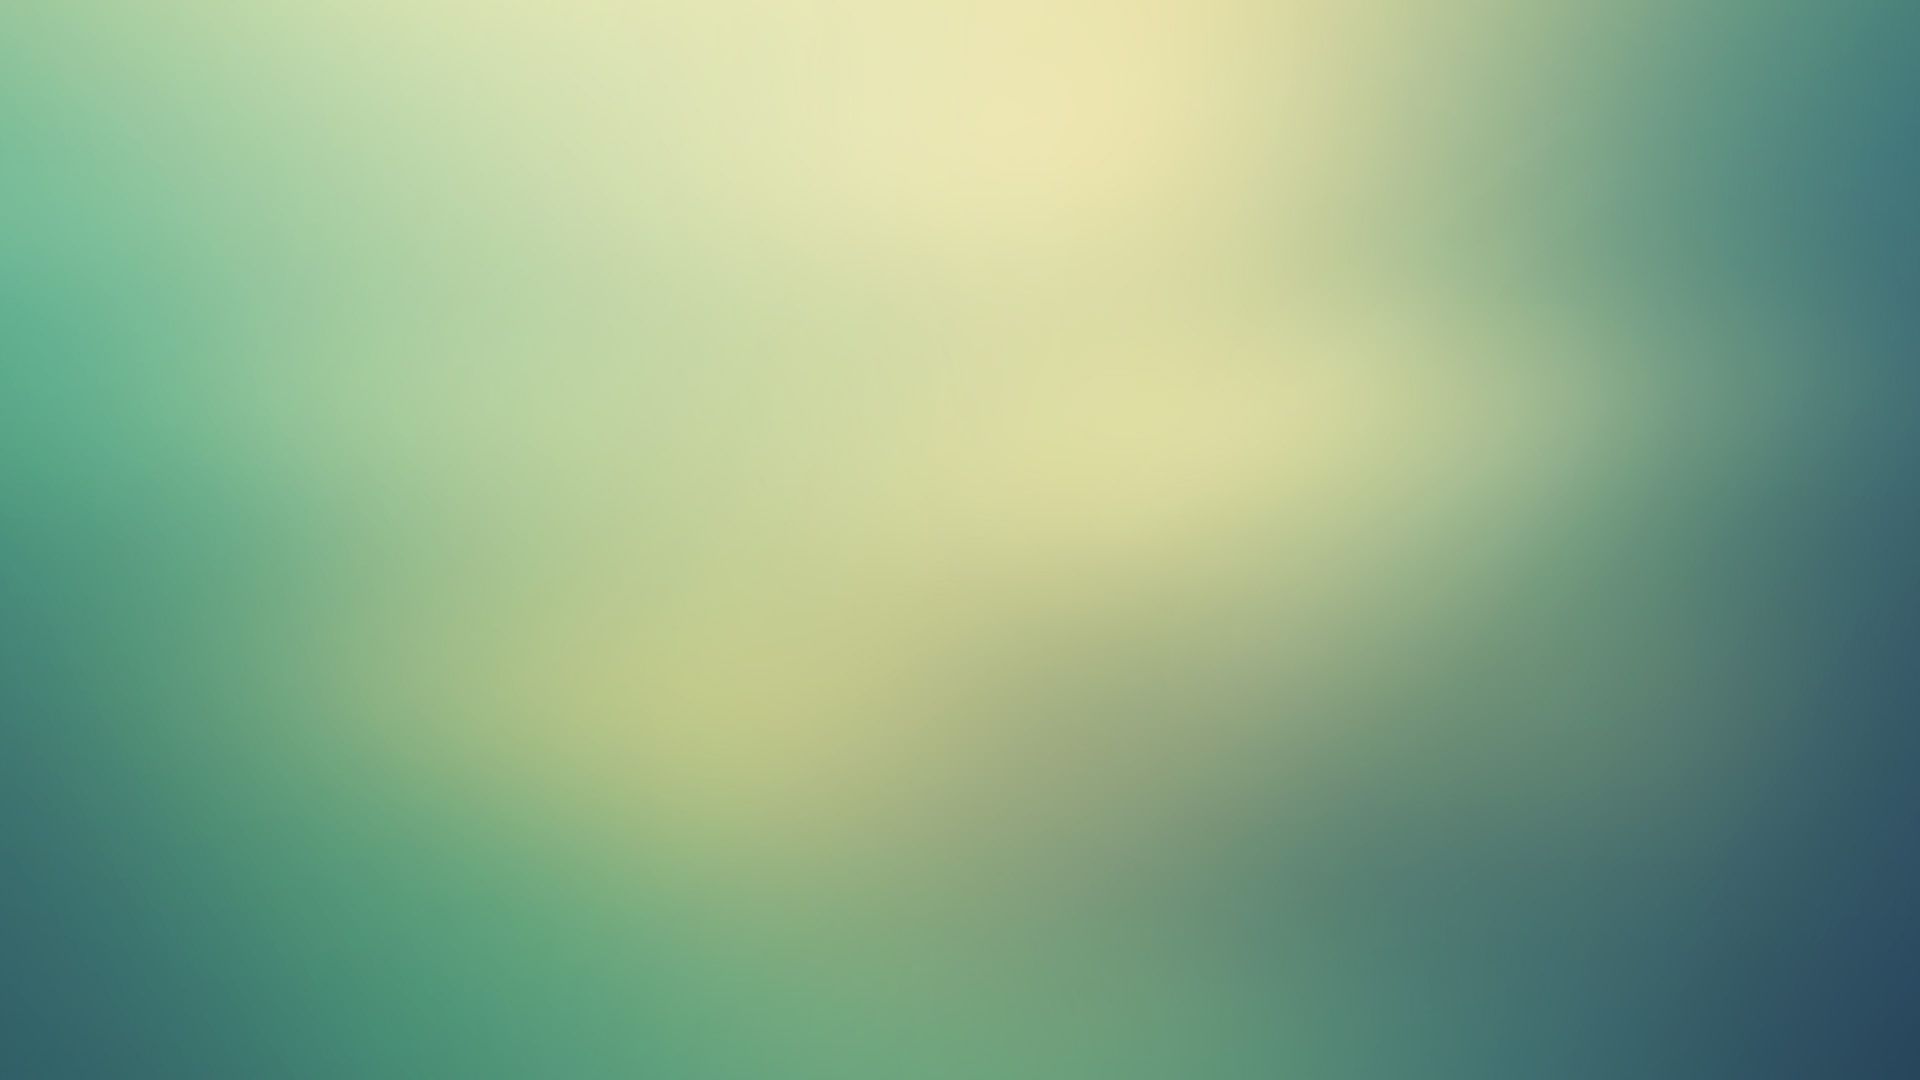 color fade wallpaper,green,blue,yellow,sky,turquoise